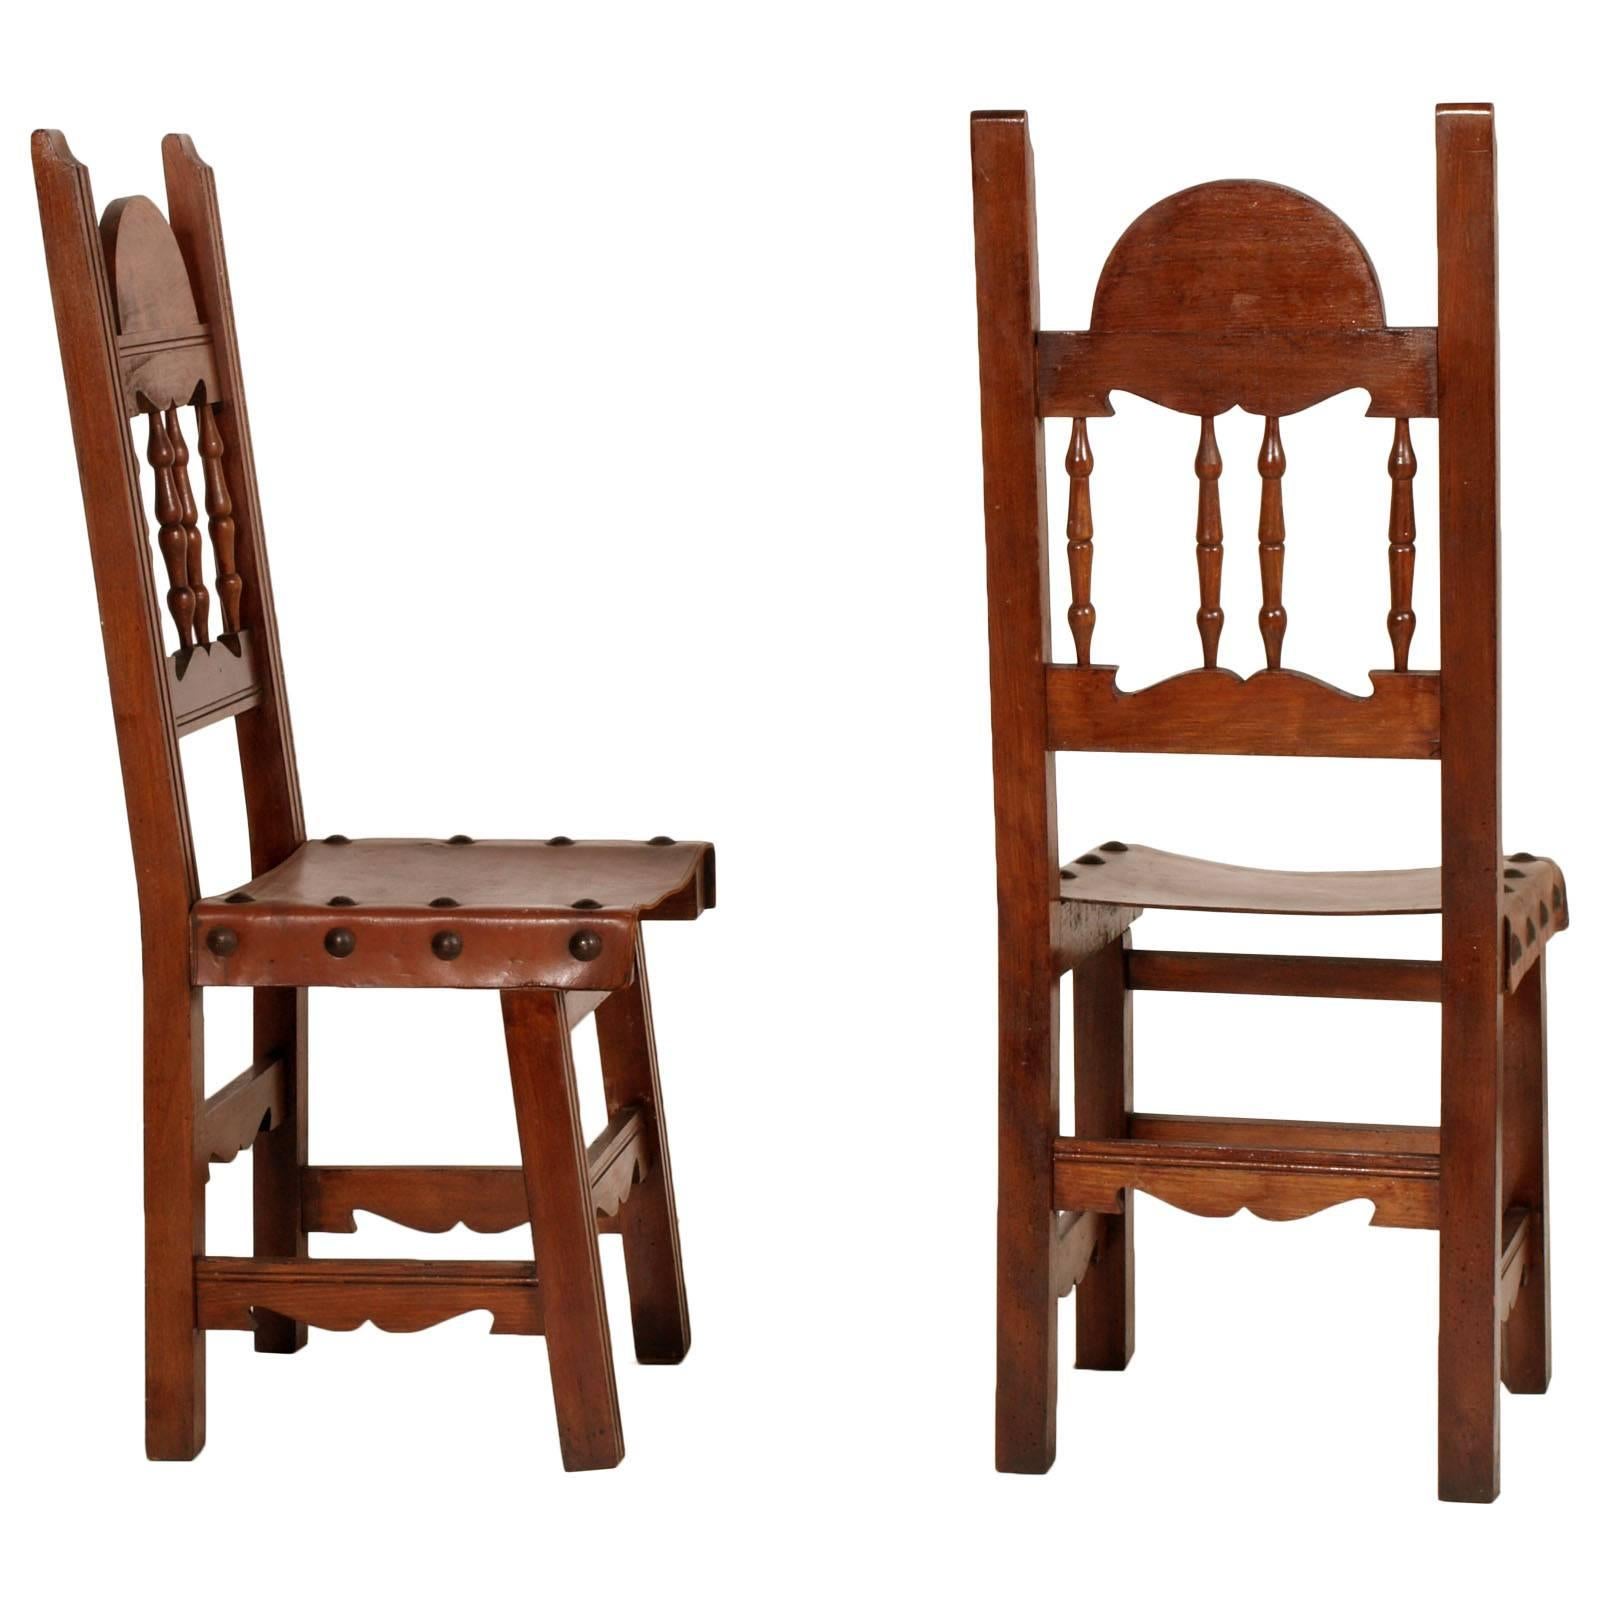 Renaissance Revival Early 20th C. Renaissance Couple Chairs in Solid Walnut and Leather , Restored